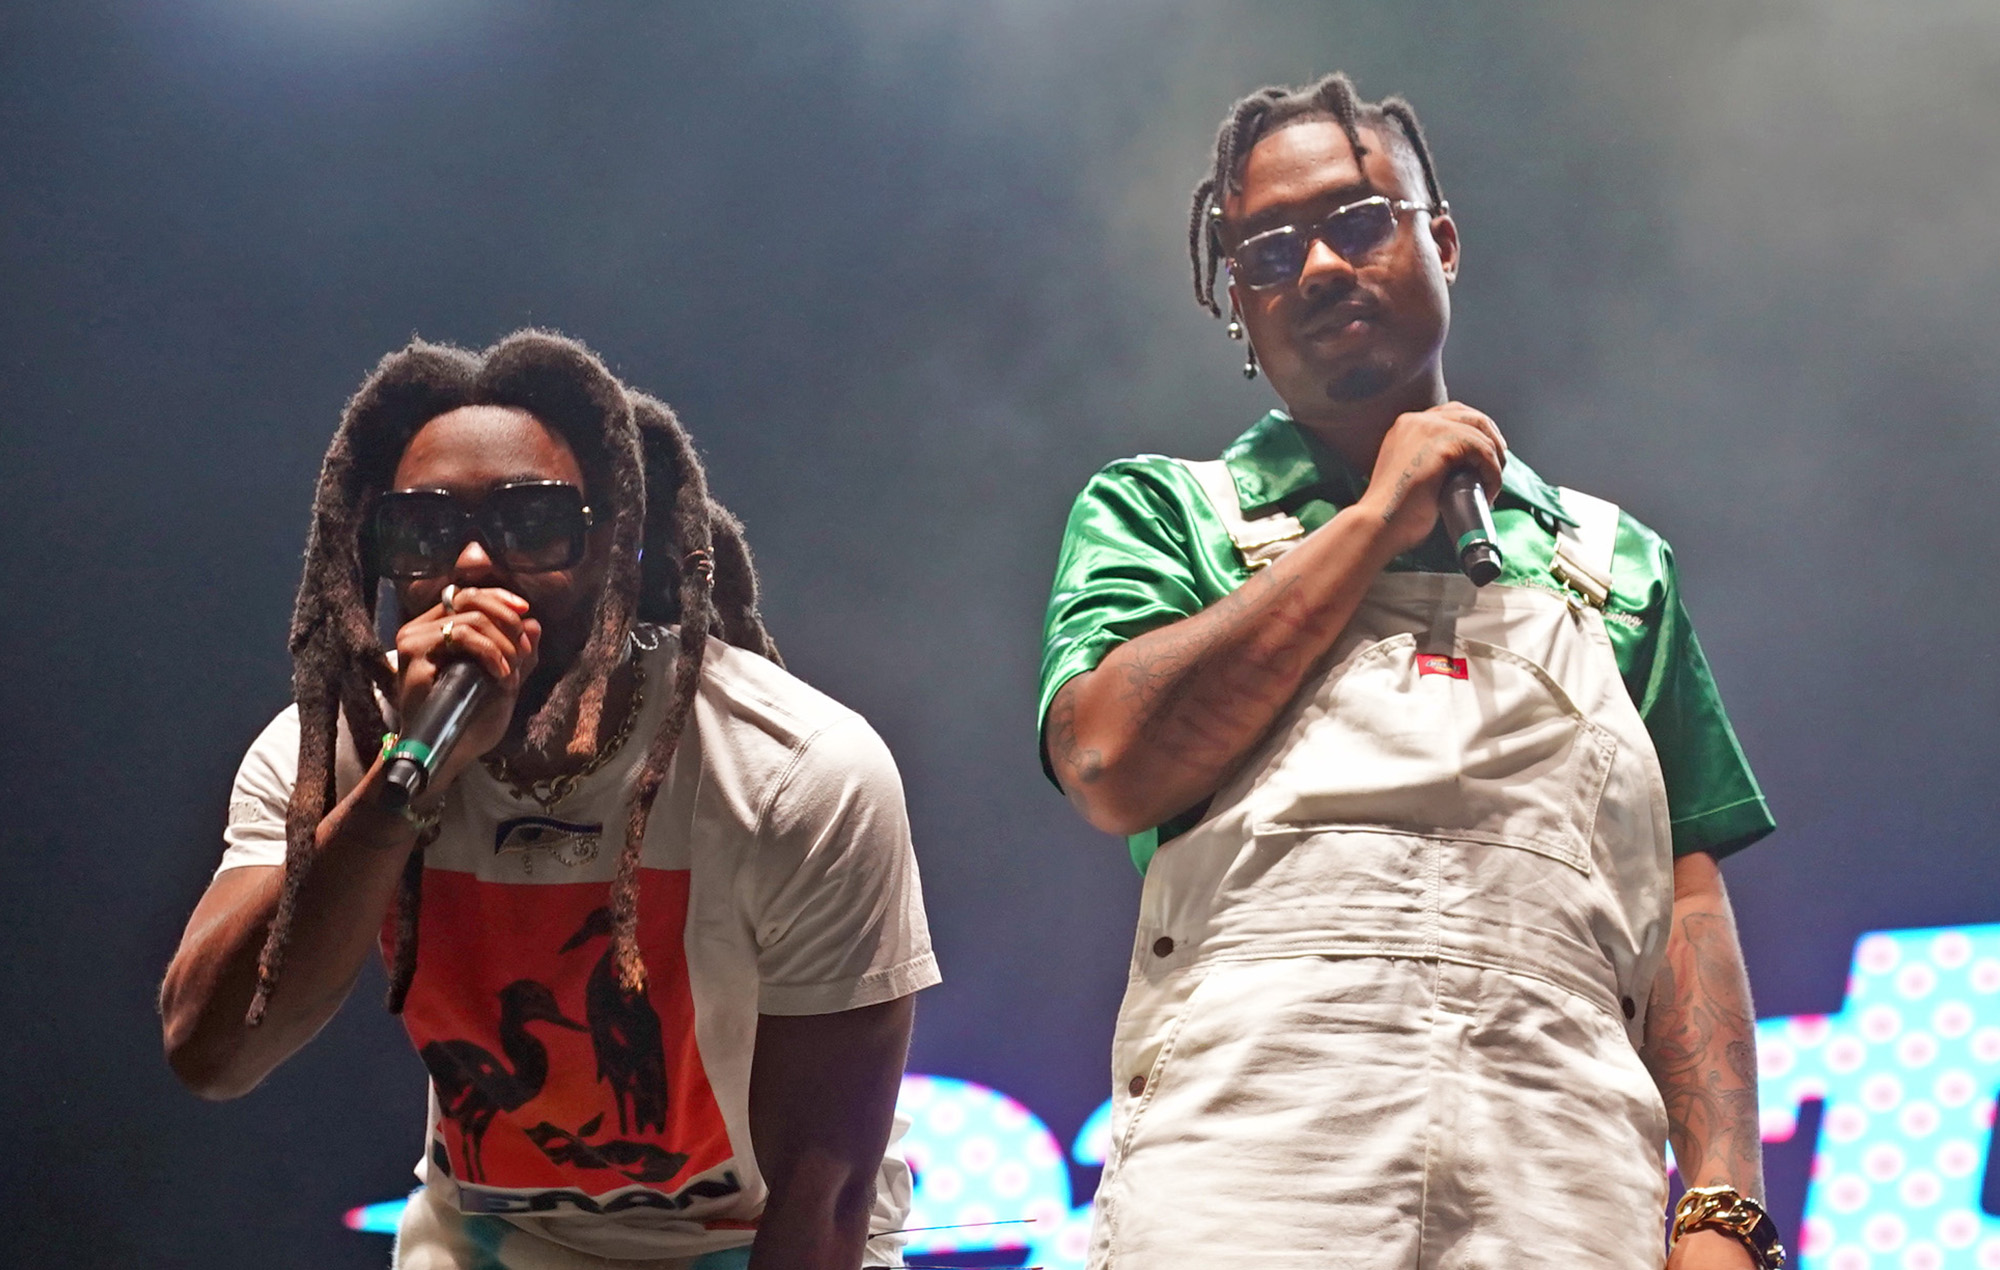 EarthGang calls for the return of hard drives with new music